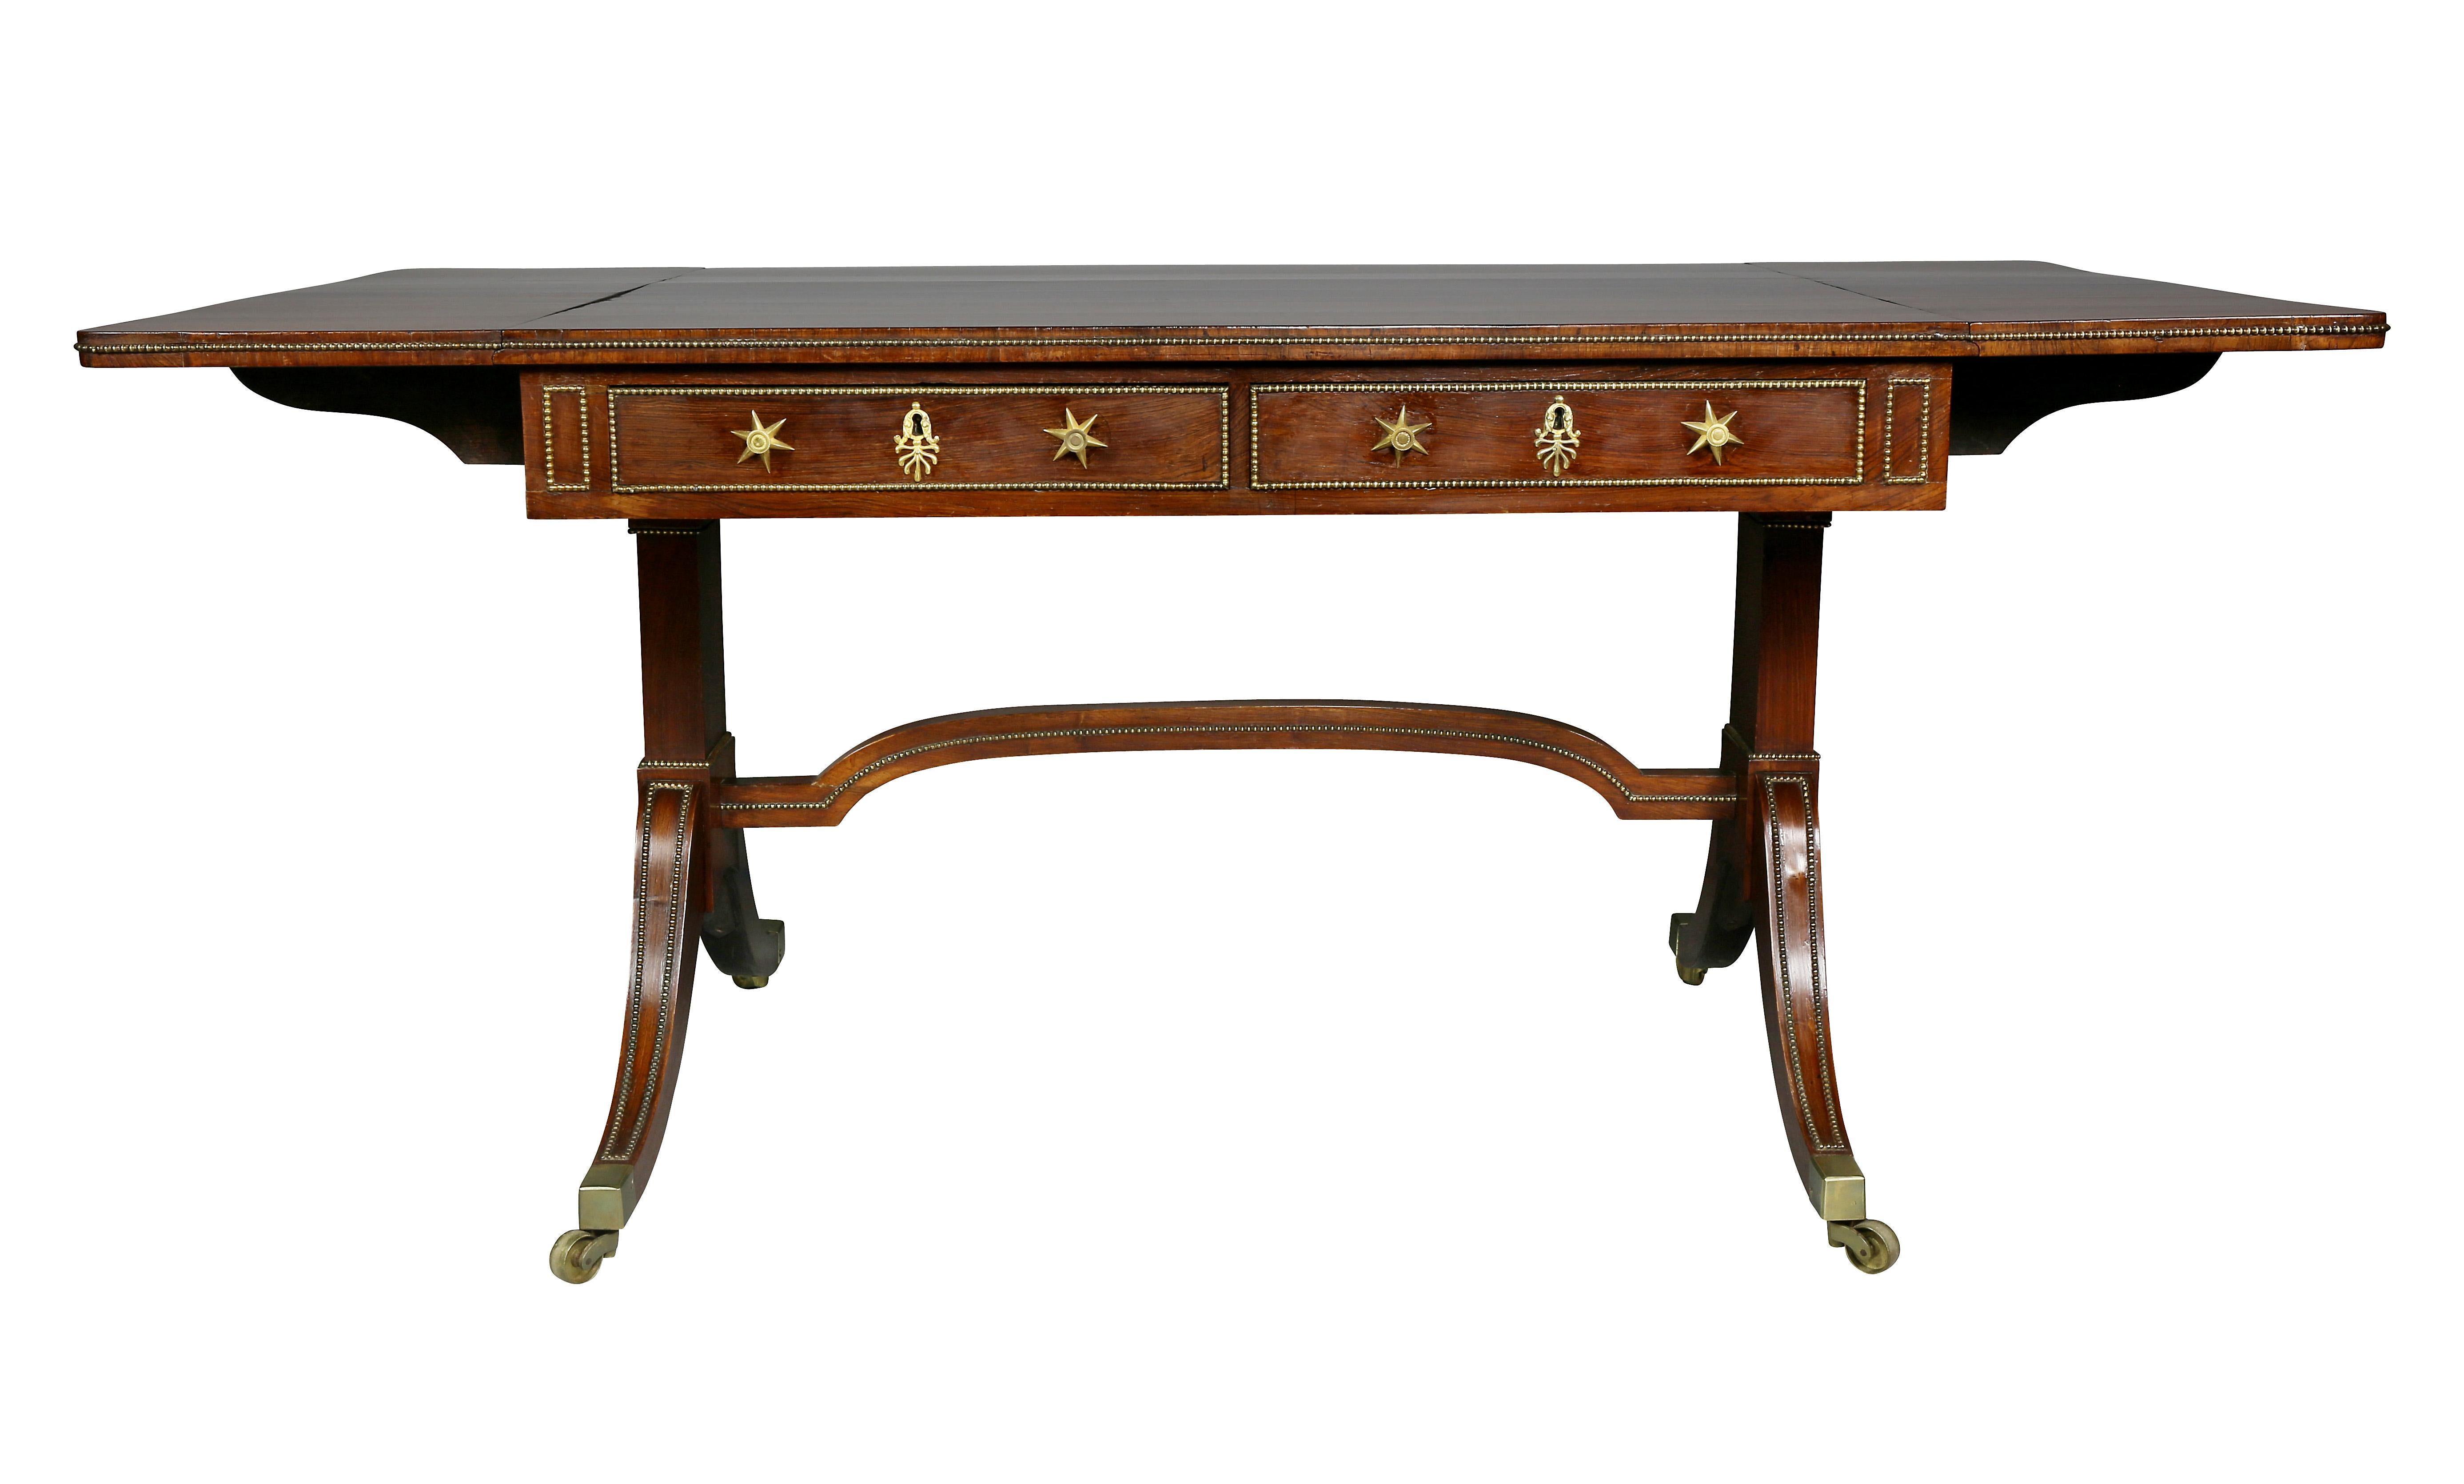 Rectangular with drop leaves, metal beaded edge, two-drawer frieze with opposing sham drawers, raised on trestle base, saber legs, casters.